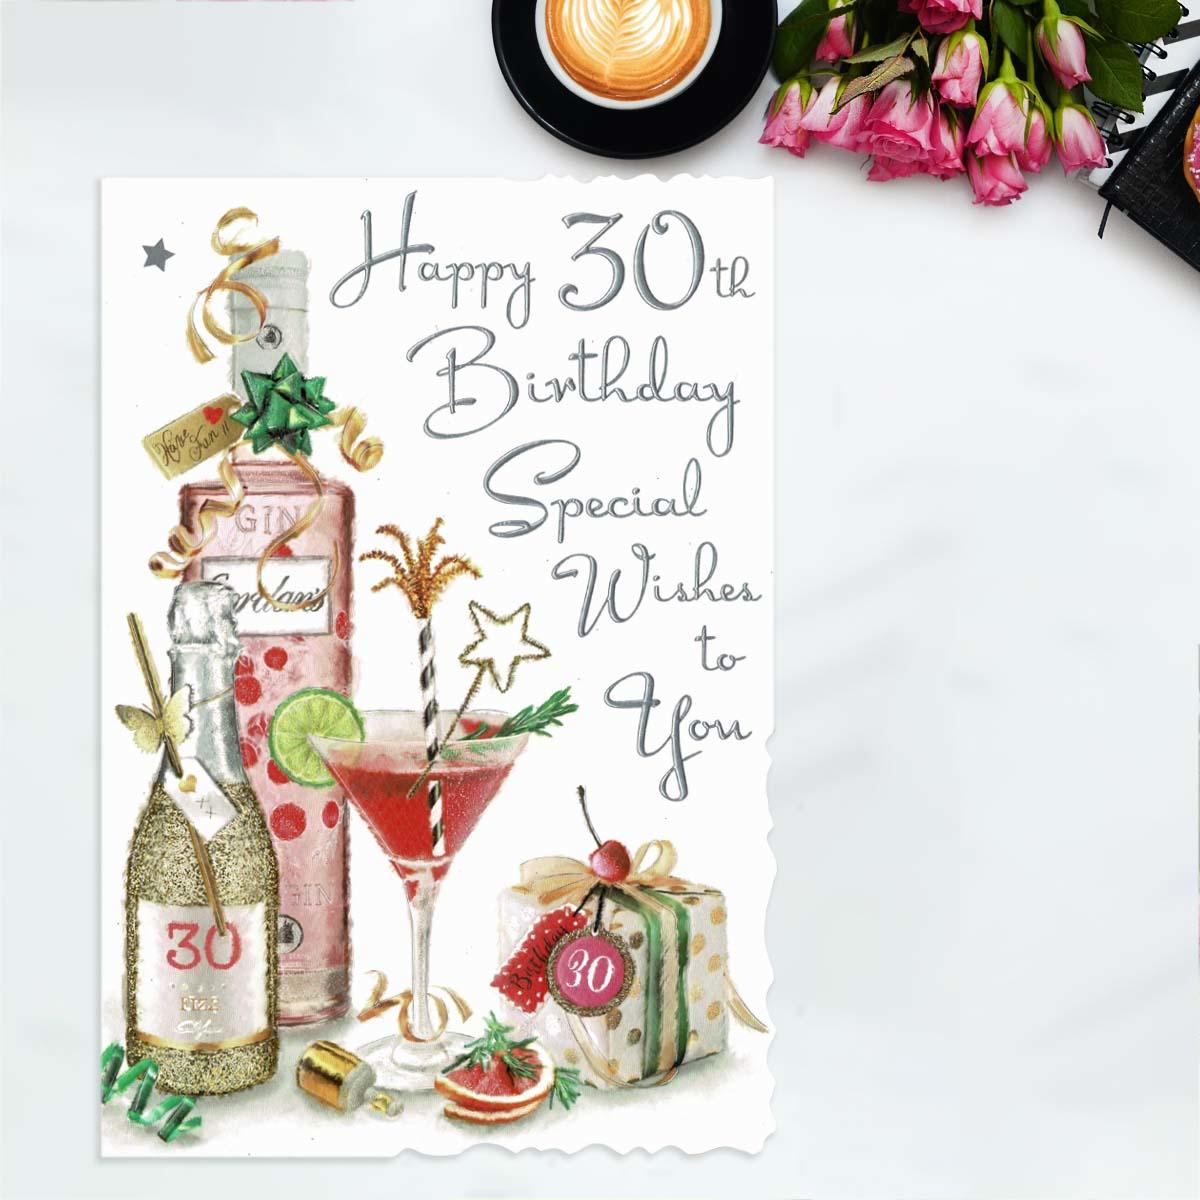 Happy 30th Birthday Special Wishes Card Front Image